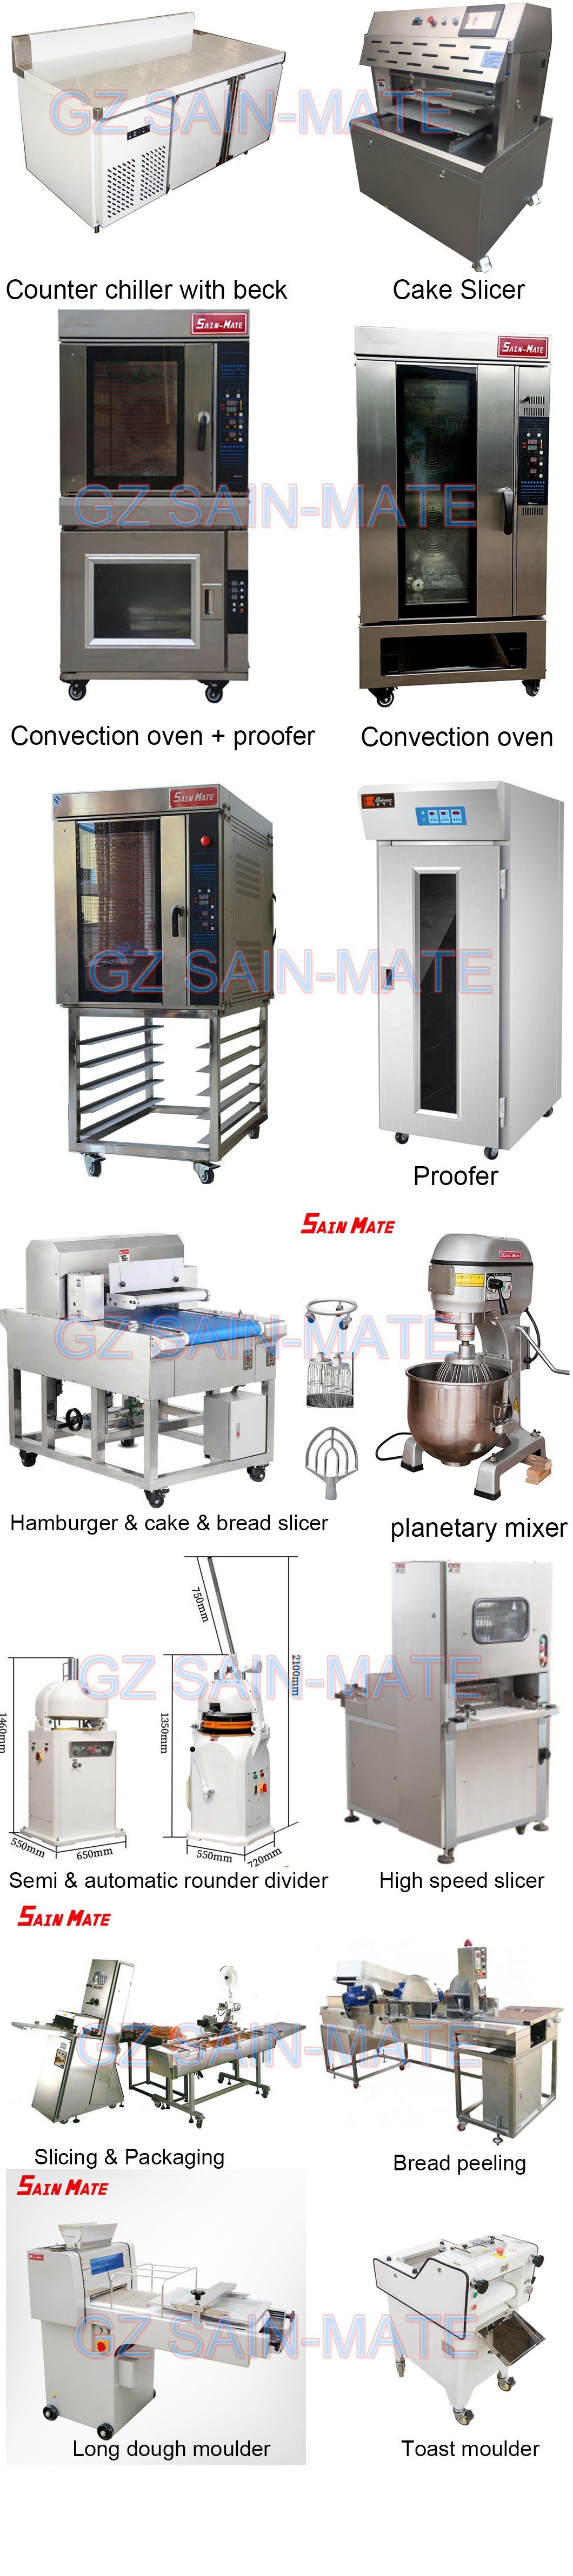 Baking Bakery Bread Used Rotary Oven for Sale, Rotary Oven for Bakery in Dubai